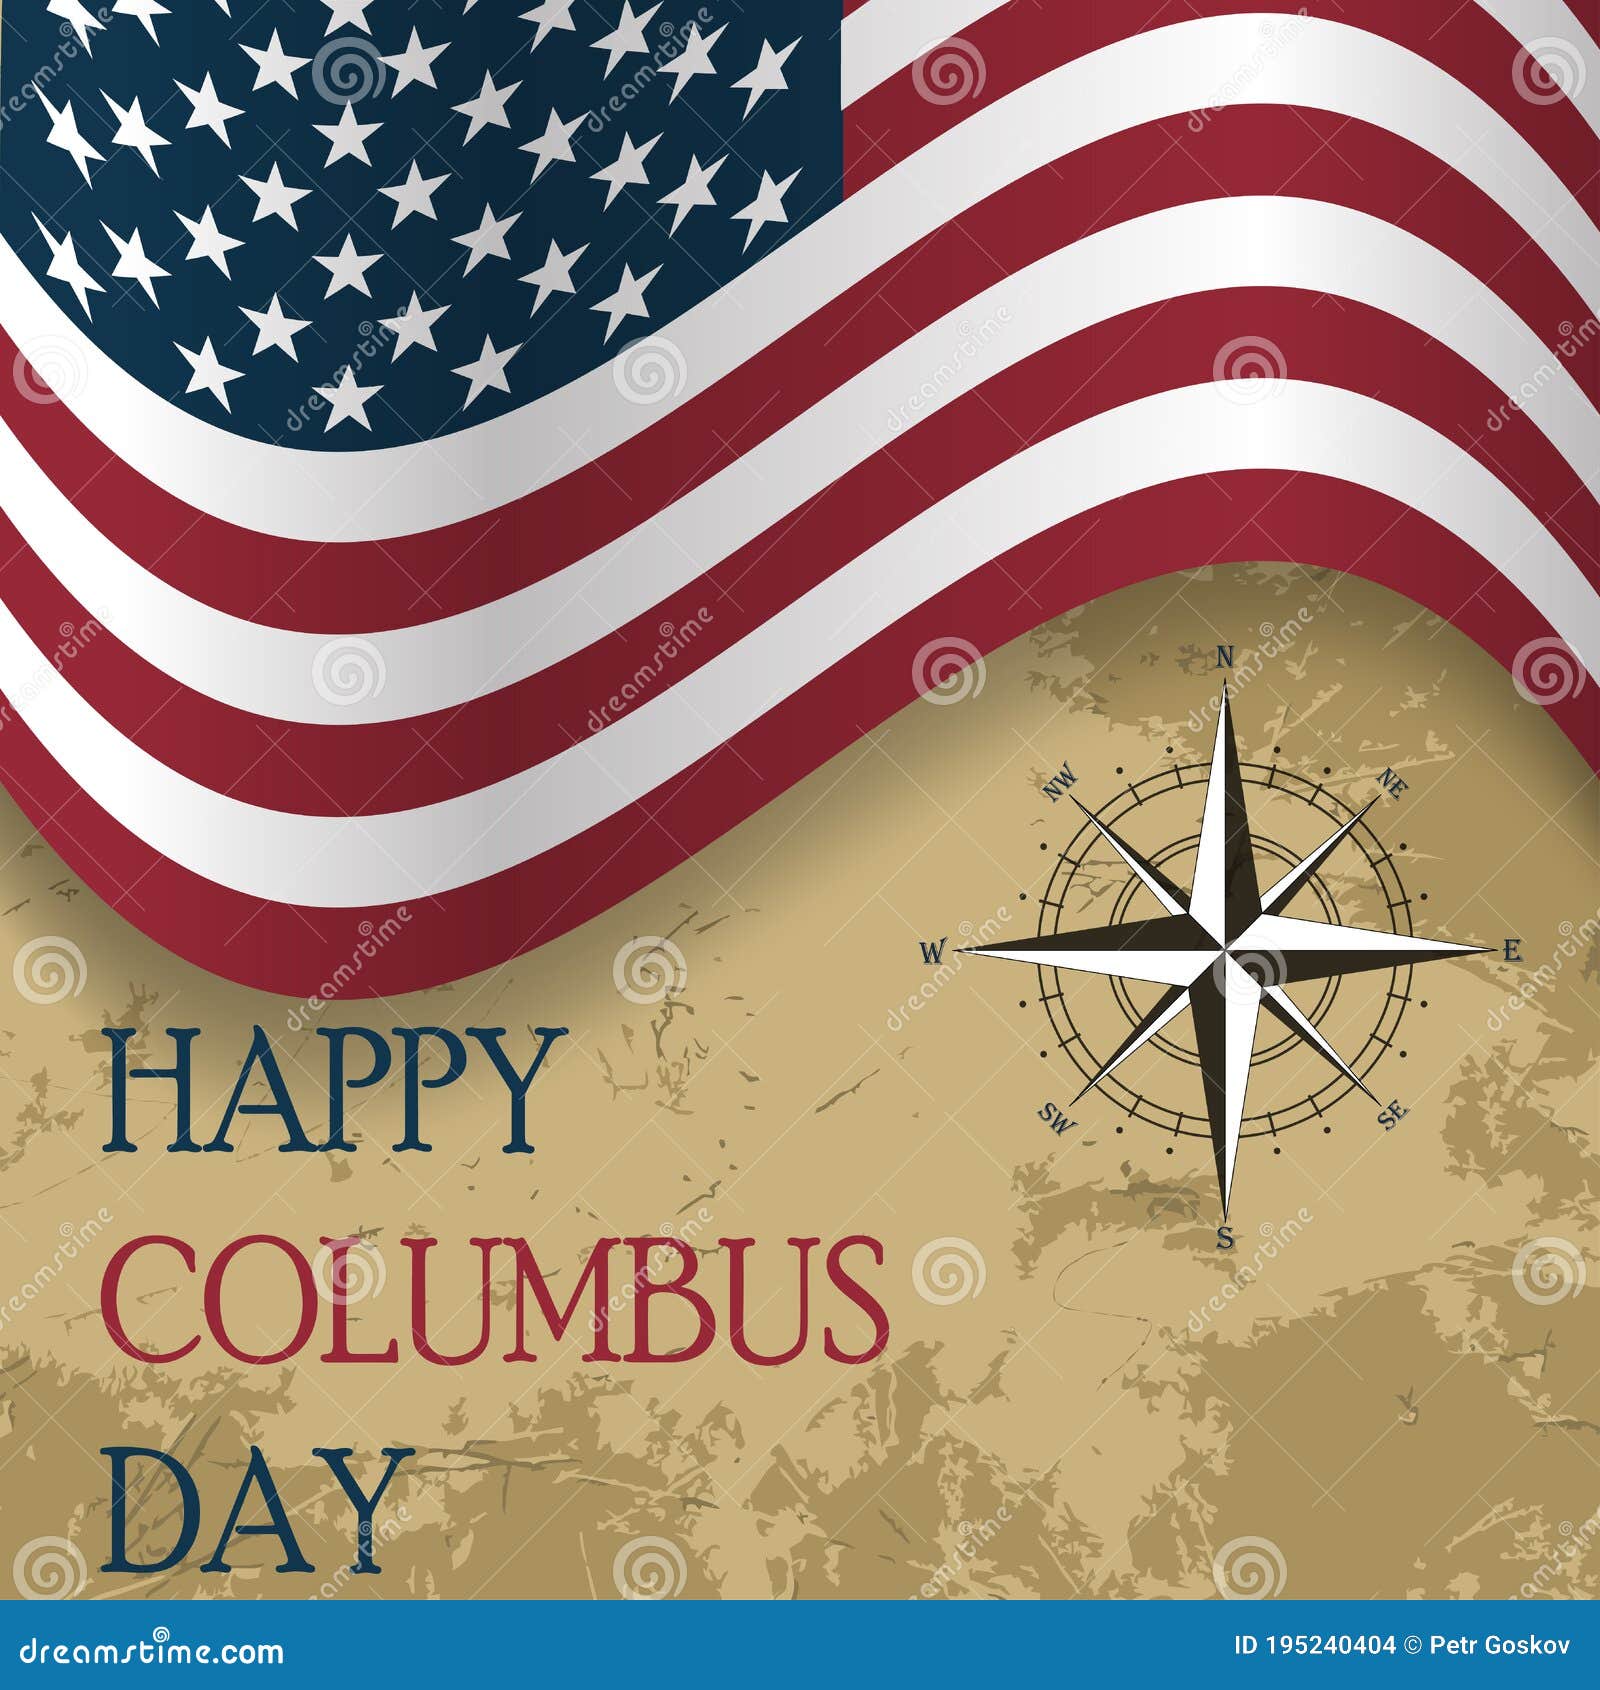 Columbus Day with usa flag stock vector. Illustration of american